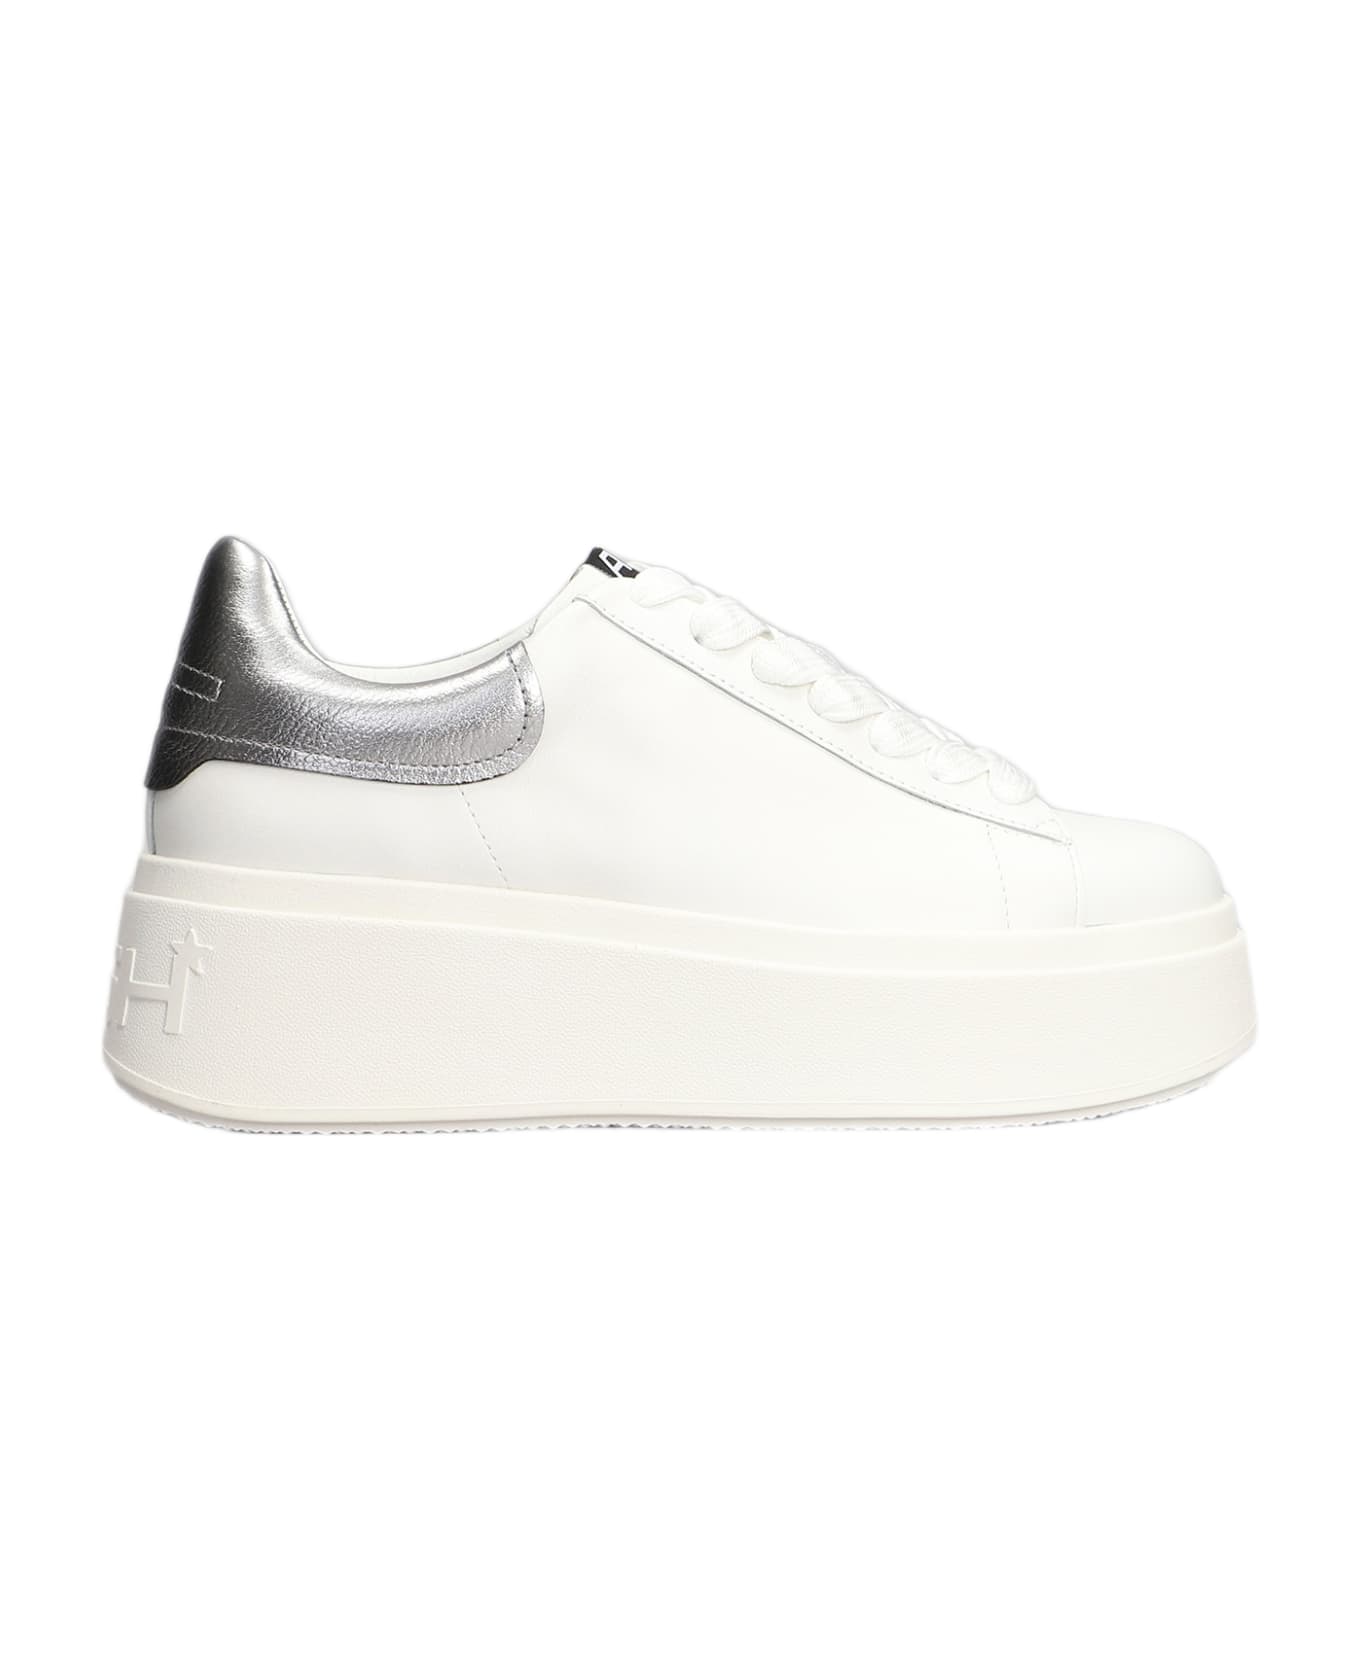 Ash Moby Sneakers In White Leather - white ウェッジシューズ